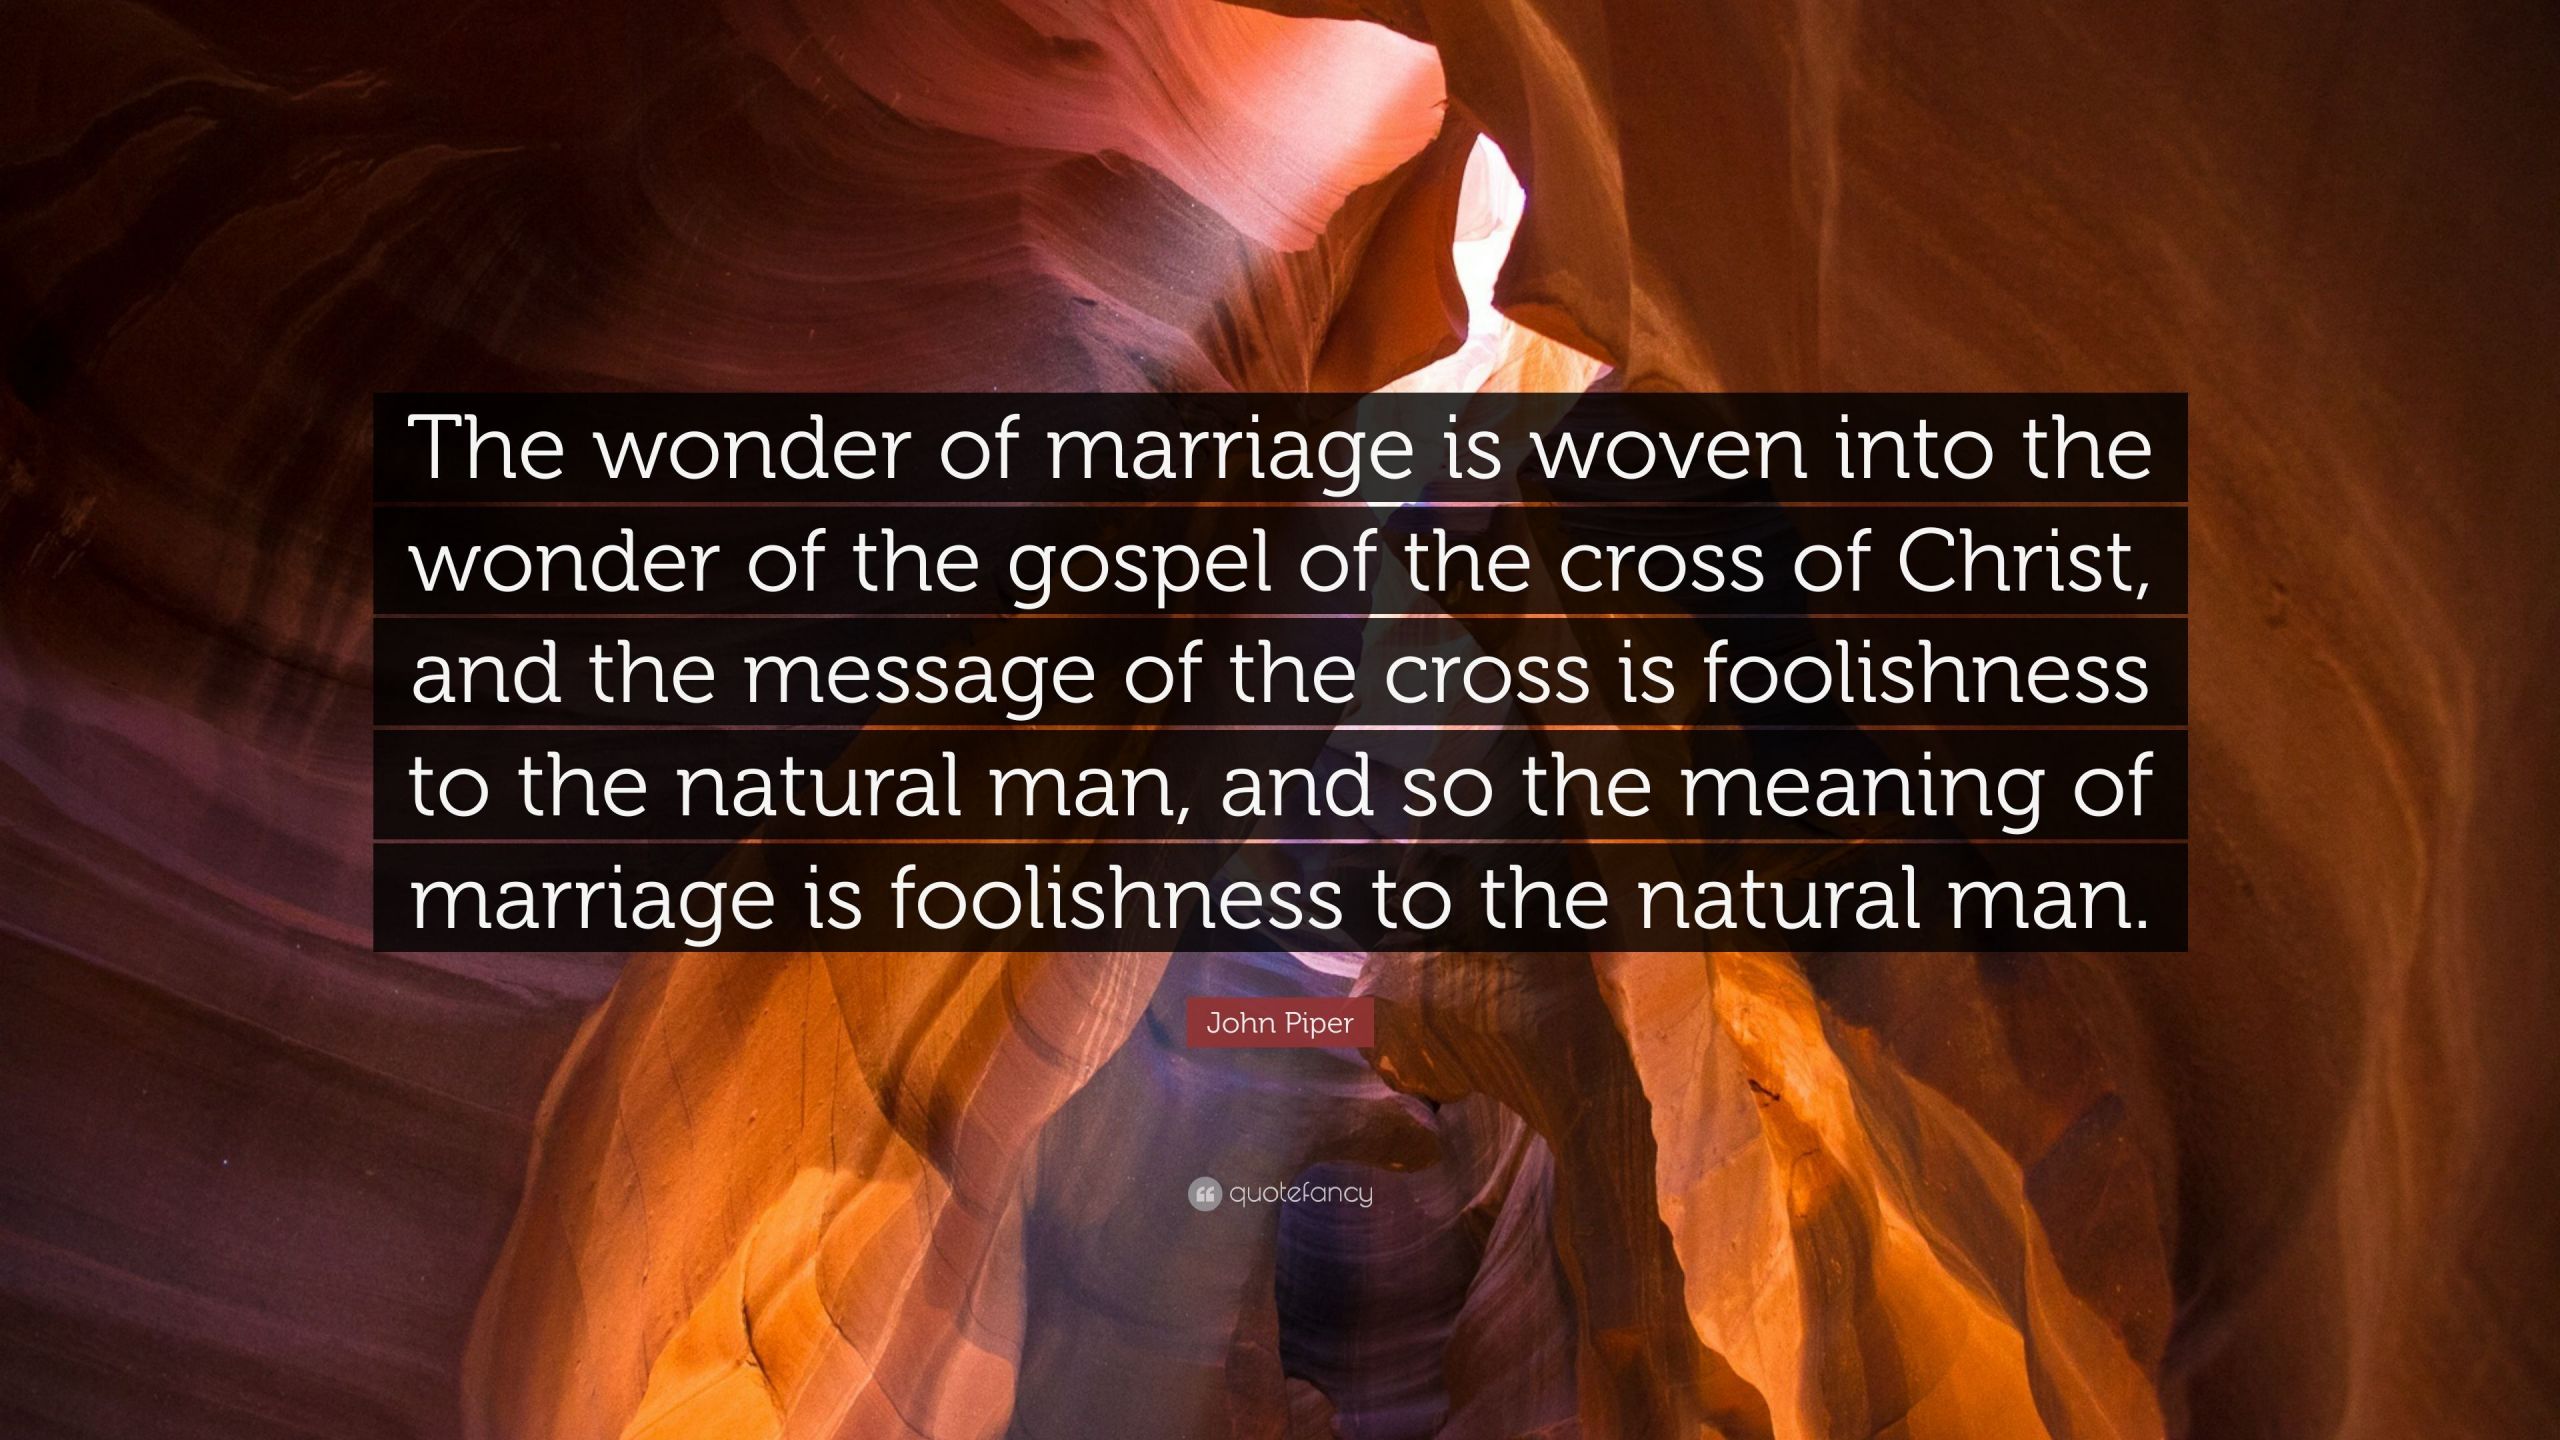 John Piper Marriage Quotes
 John Piper Quote “The wonder of marriage is woven into